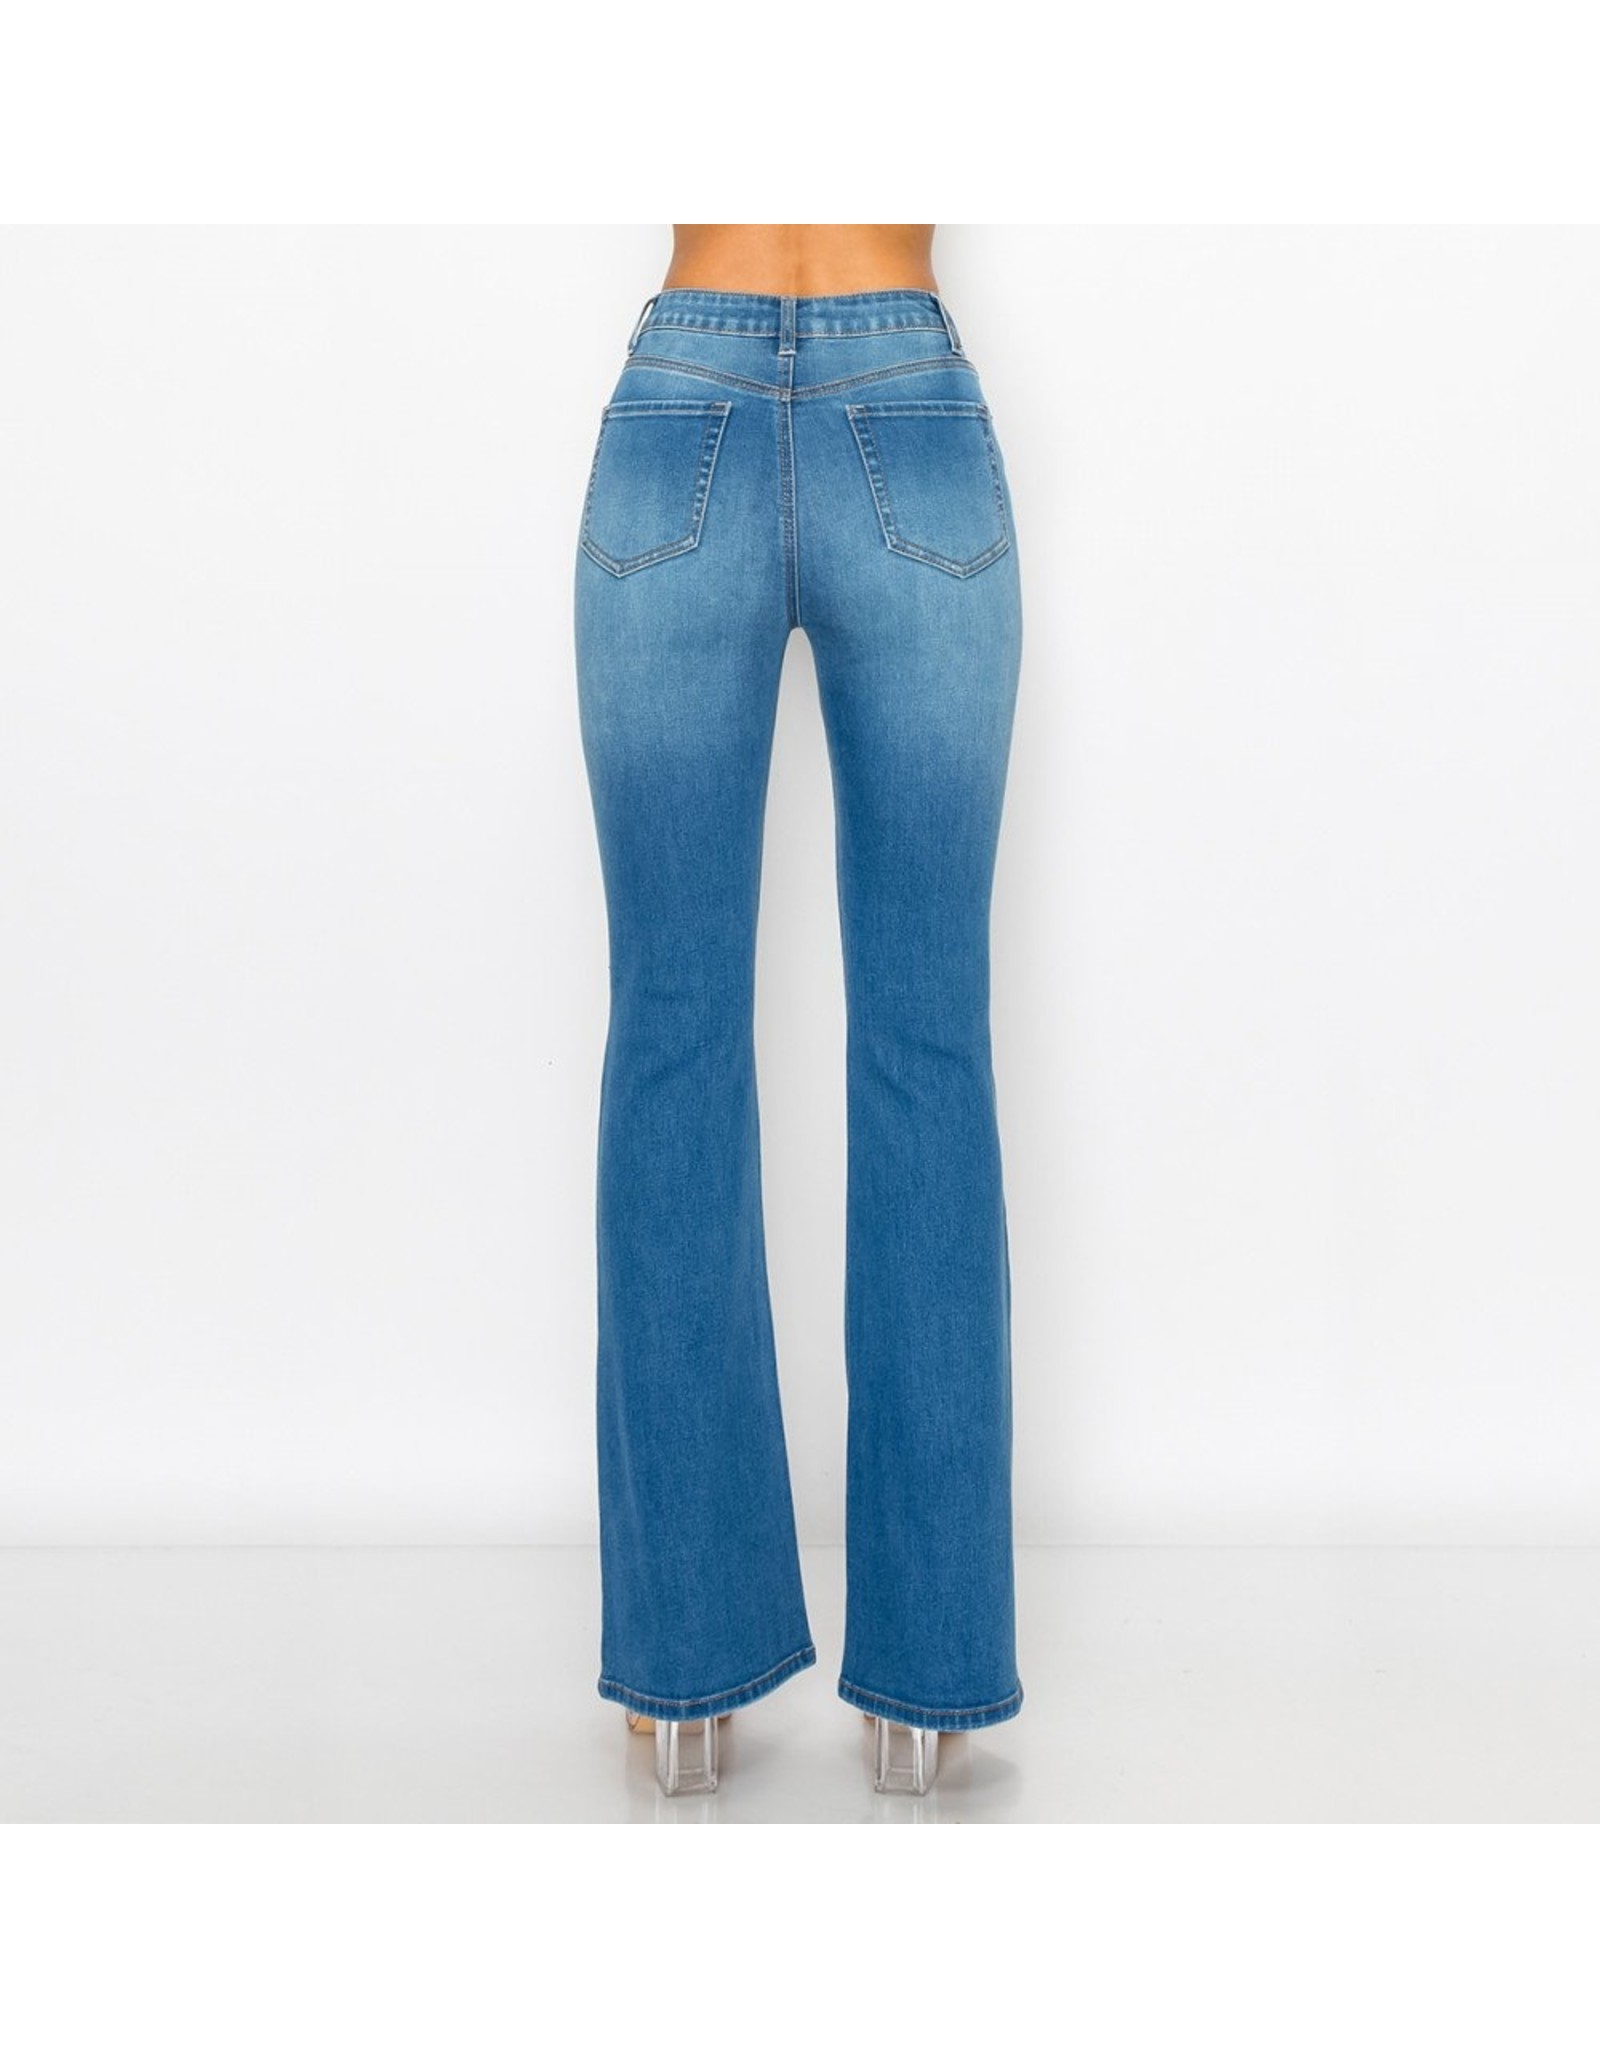 WAX JEANS FLARE STYLE 90261